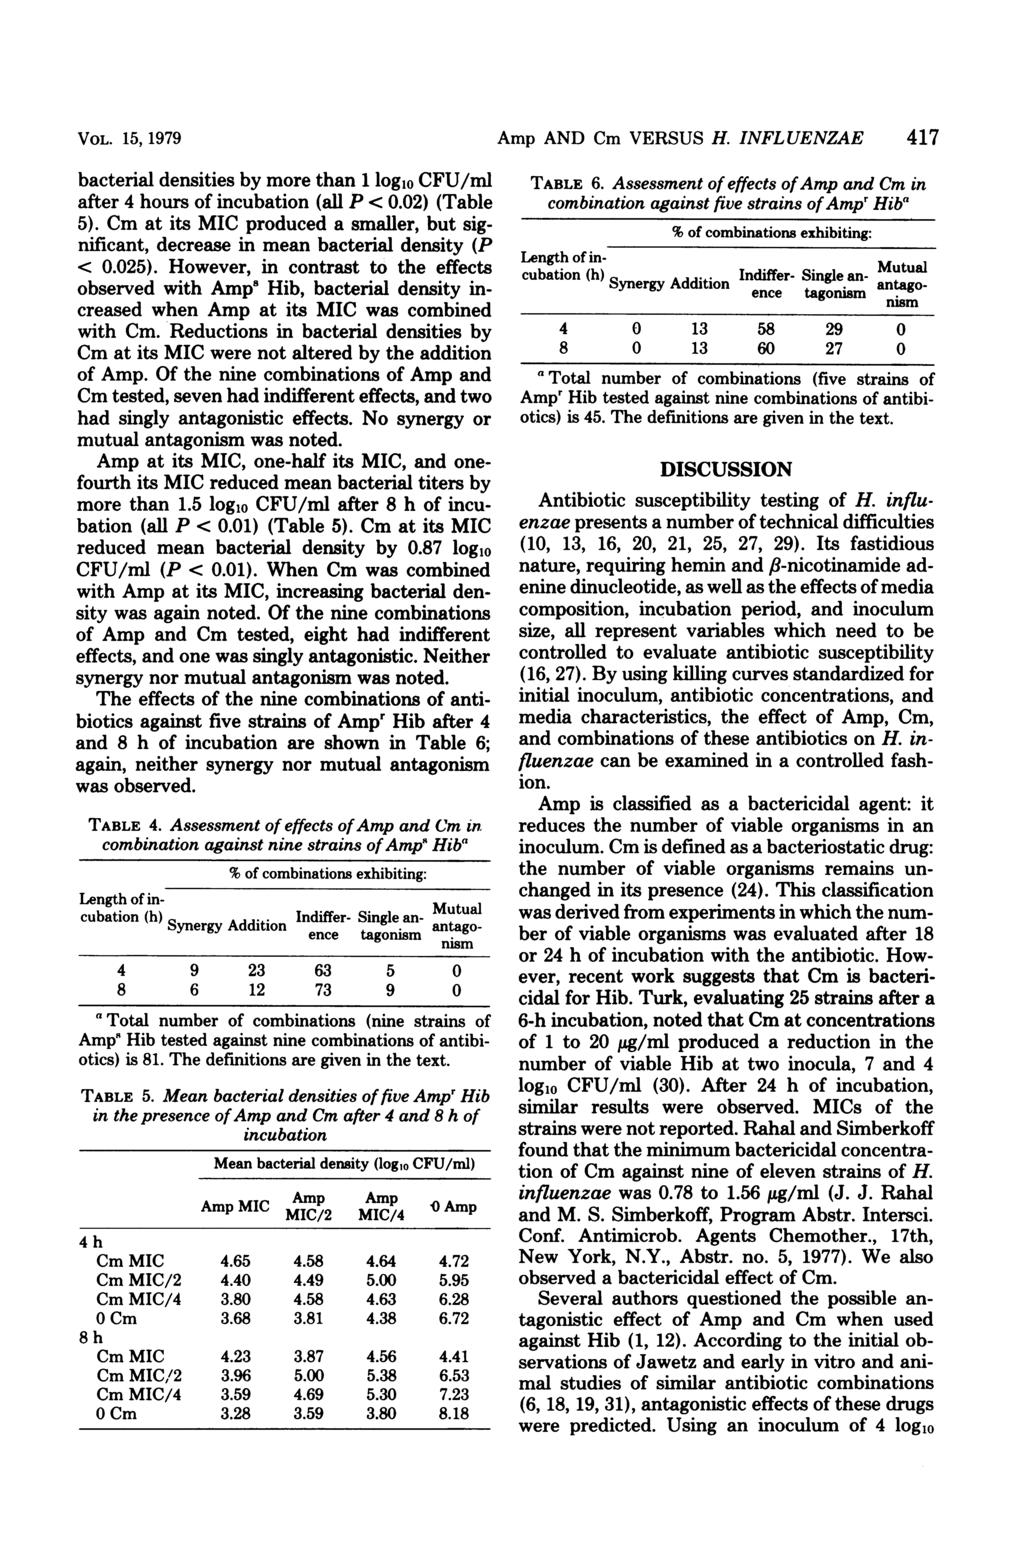 VOL. 15, 1979 Amp AND Cm VERSUS H. INFLUENZAE 417 bacterial densities by more than 1 log1o CFU/ml after 4 hours of incubation (all P < 0.02) (Table 5).